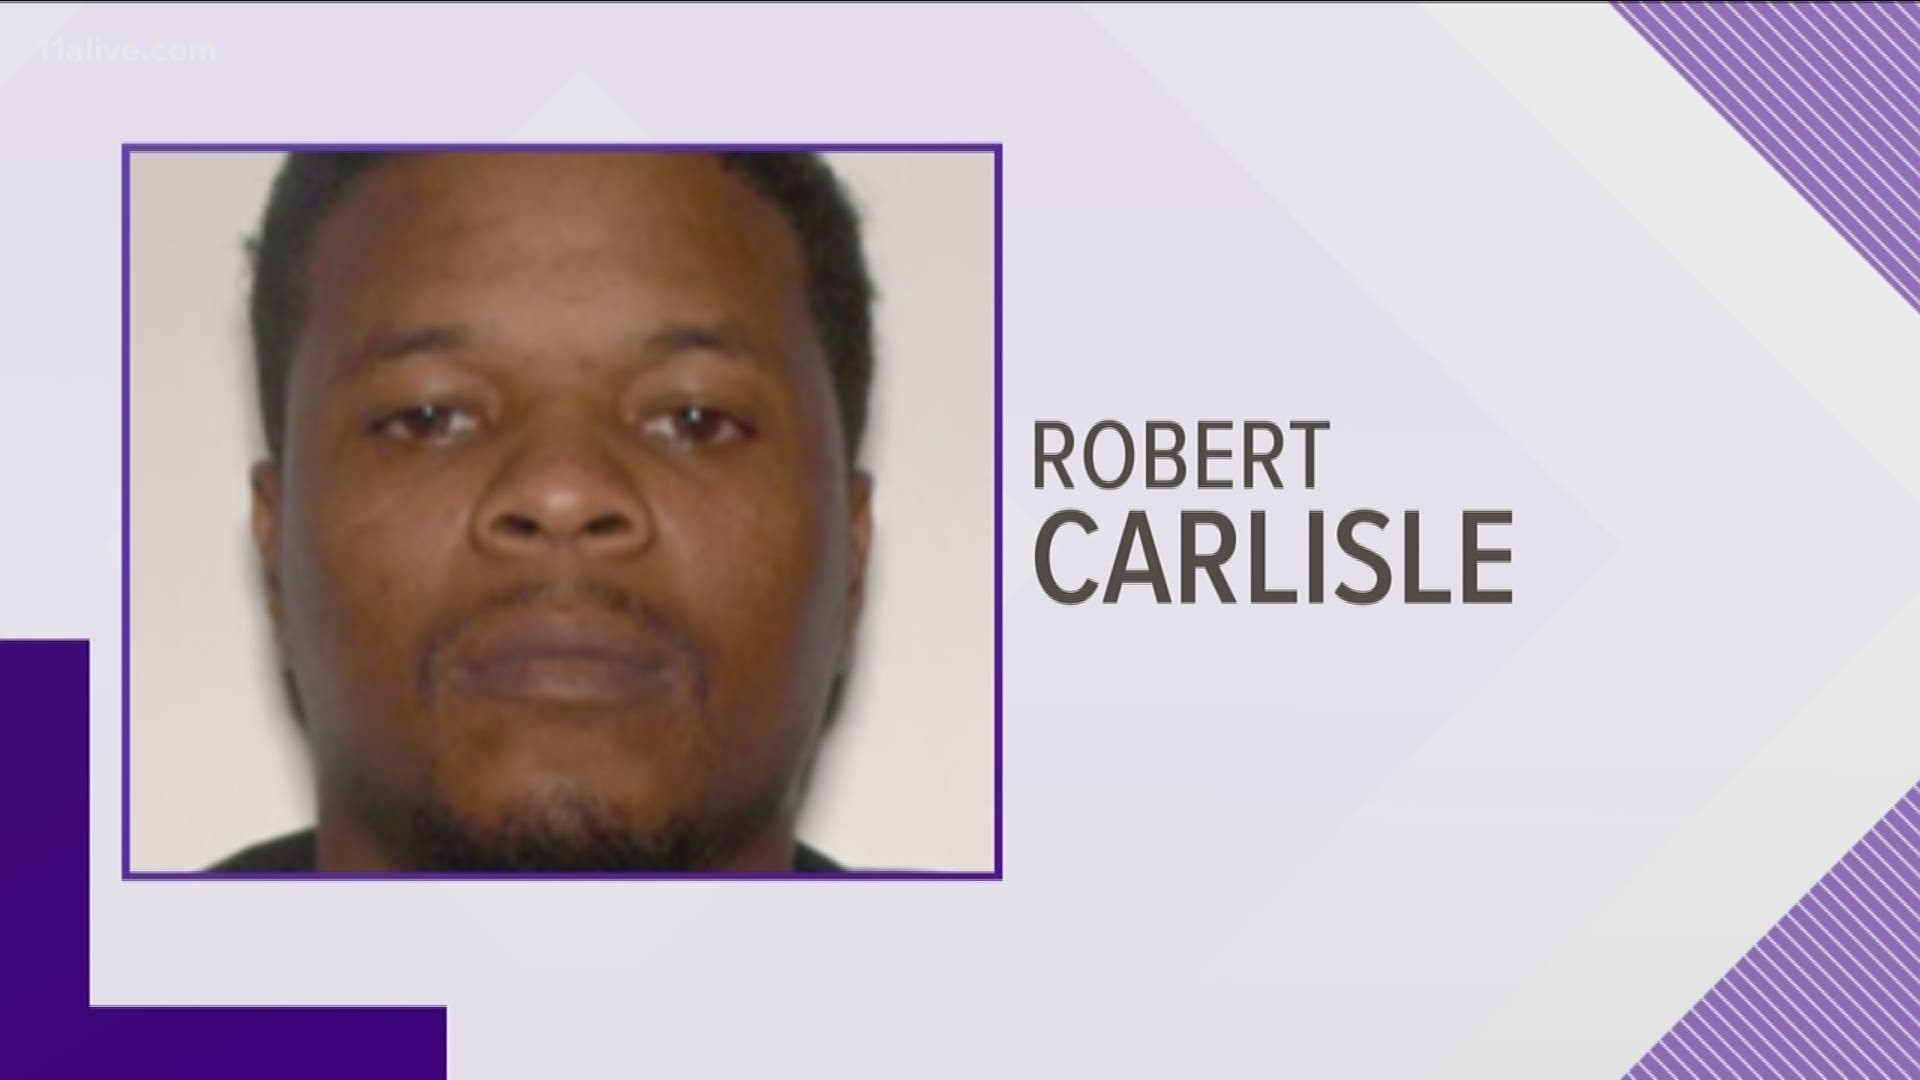 Robert Maurice Carlisle AKA “Different” was arrested by an FBI SWAT team in conjunction with DeKalb County Police late Thursday night.